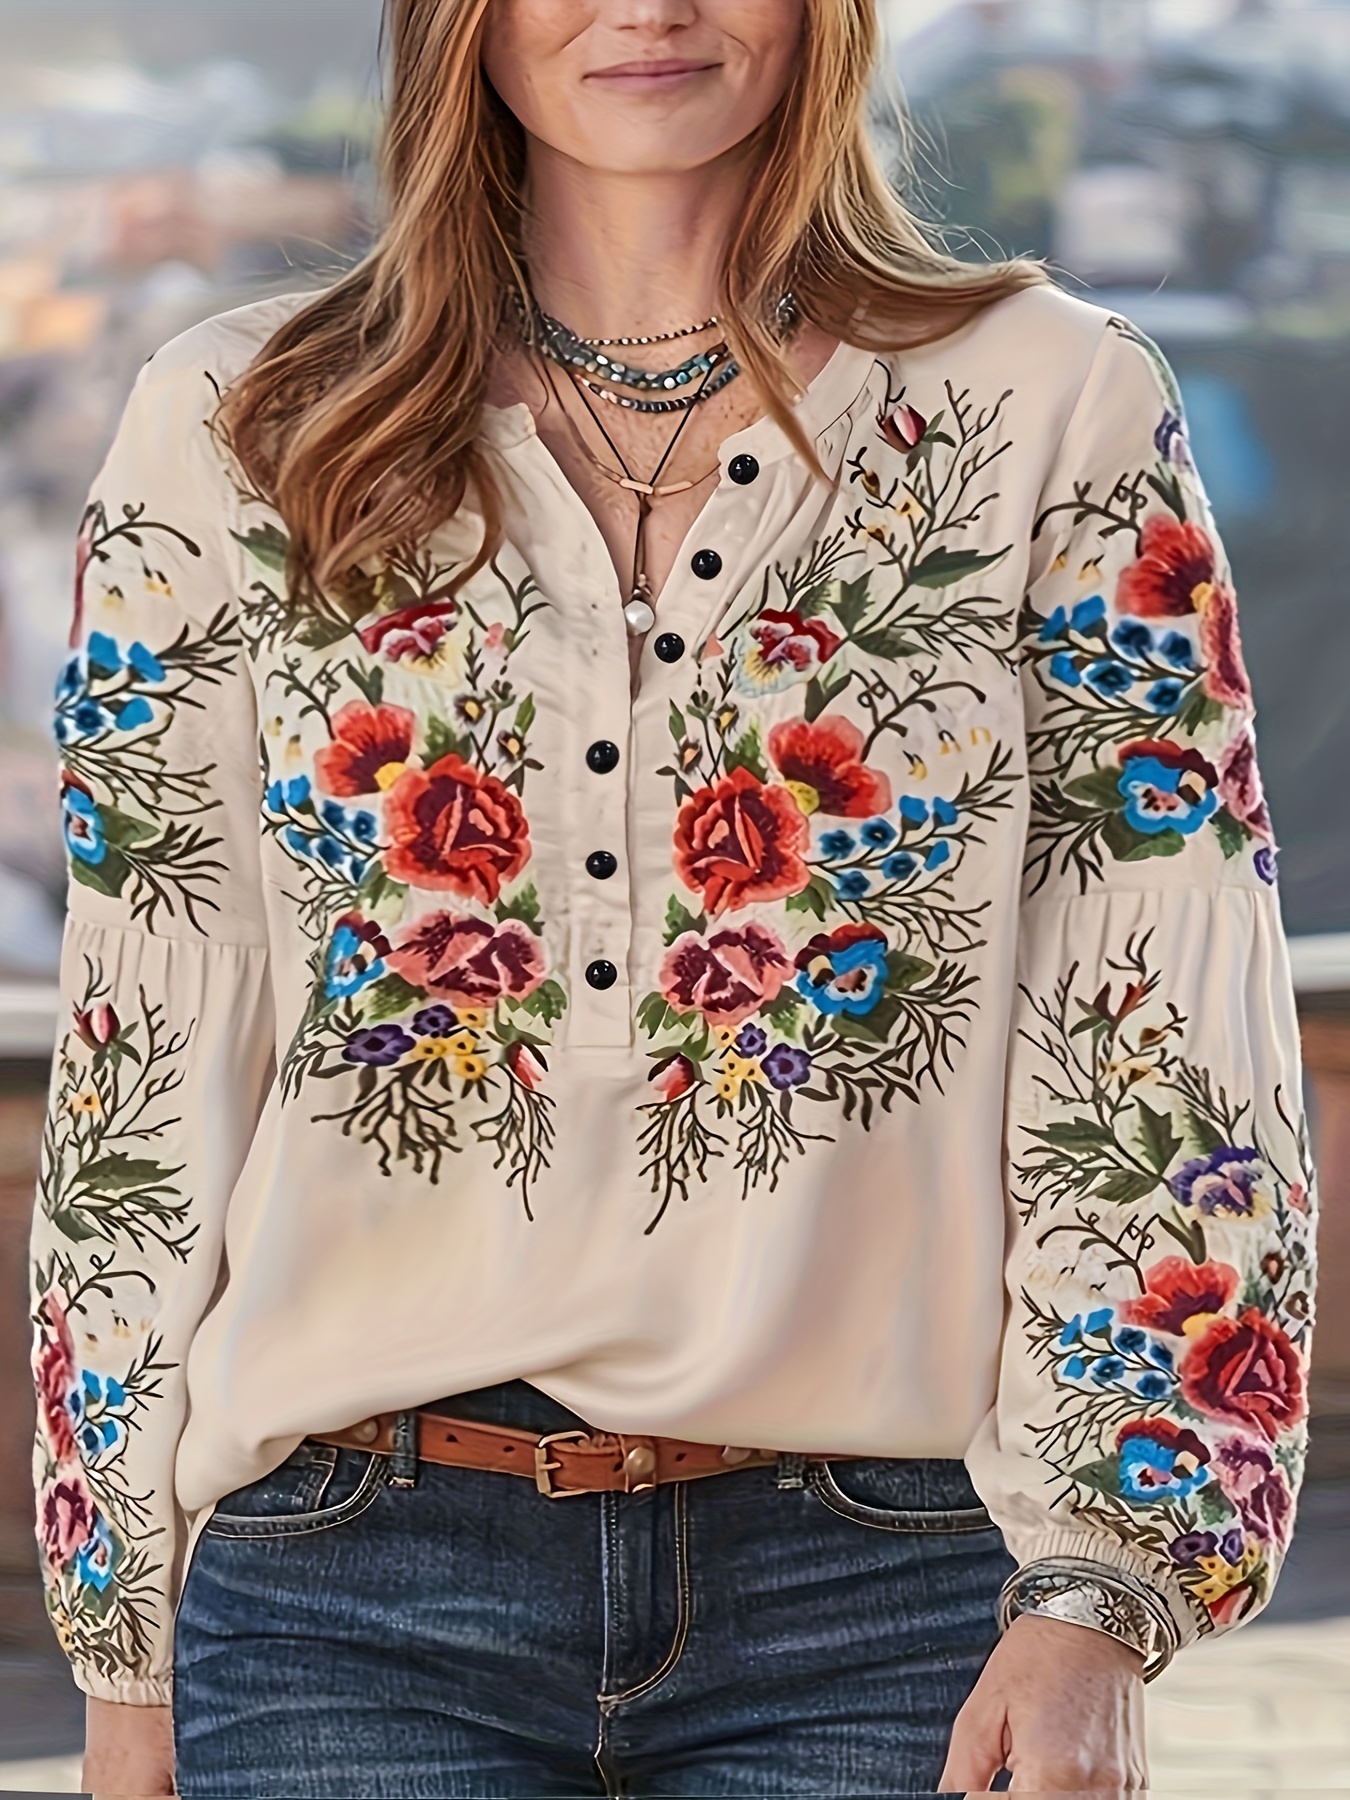 Plus Size Boho Tops for Women Cotton Linen 3/4 Sleeve Graphic Tees Floral  Lace Embroidery Hollow Casual Shirts